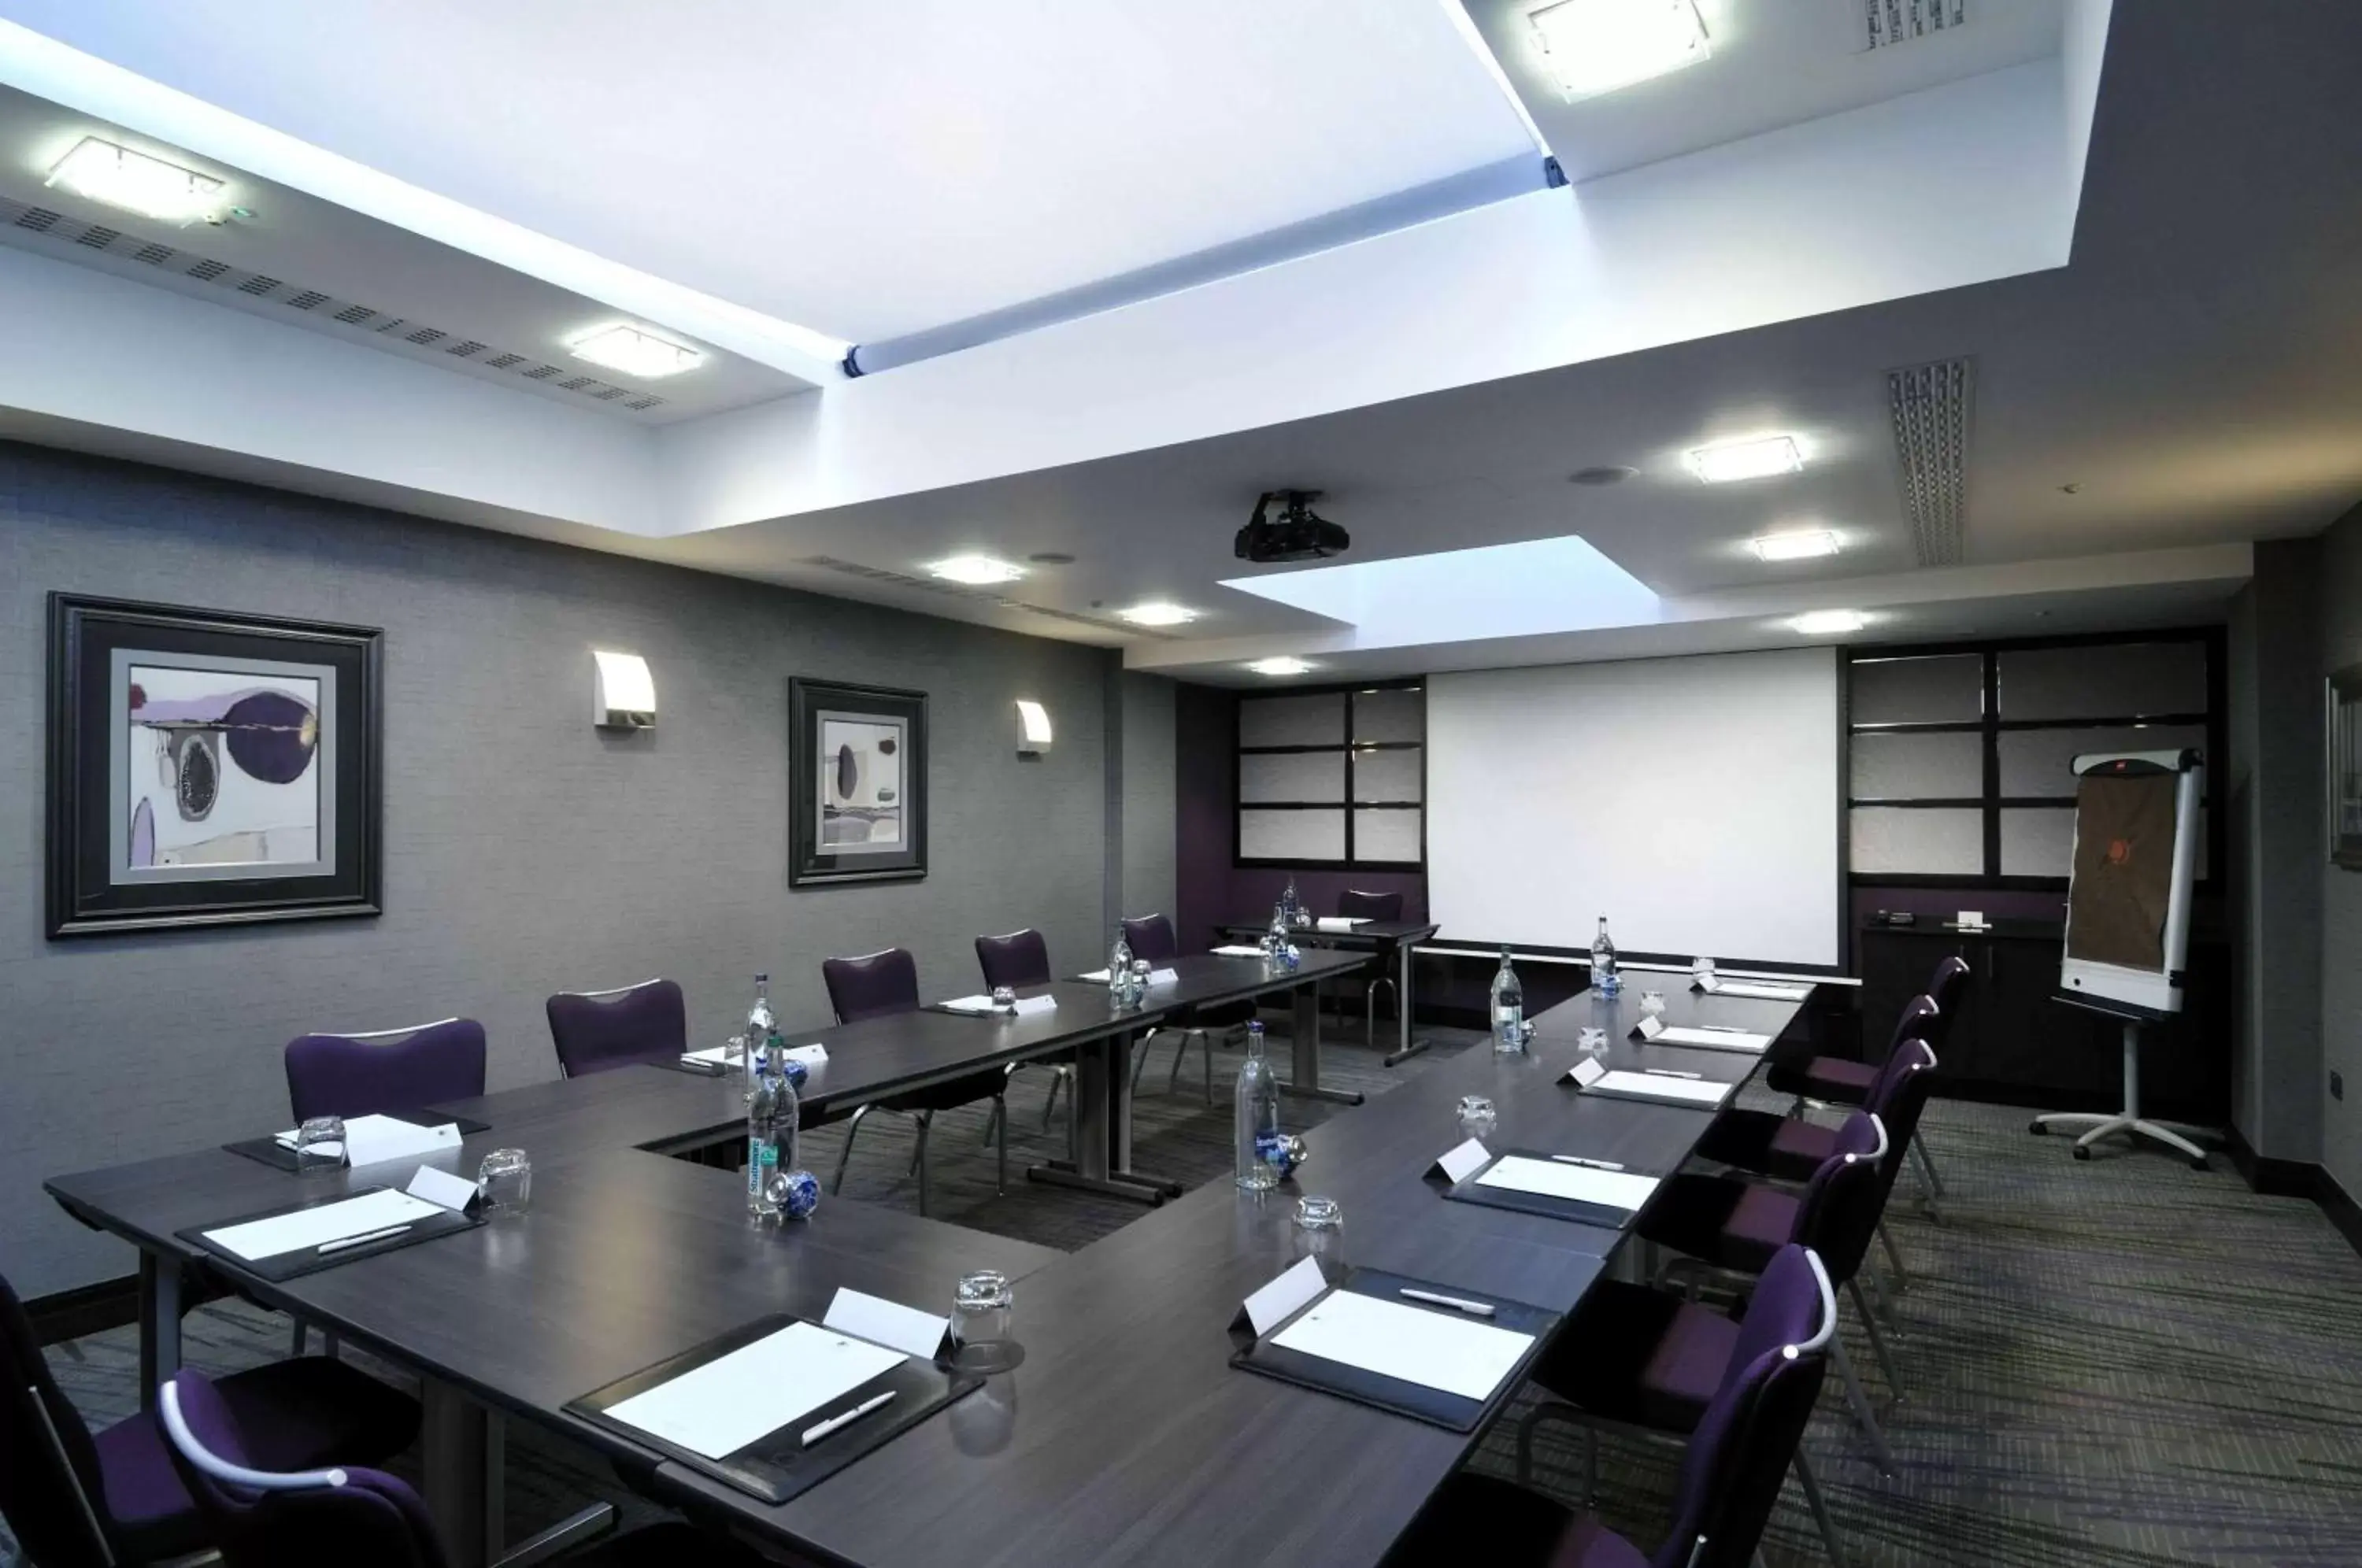 Meeting/conference room in DoubleTree By Hilton London - West End